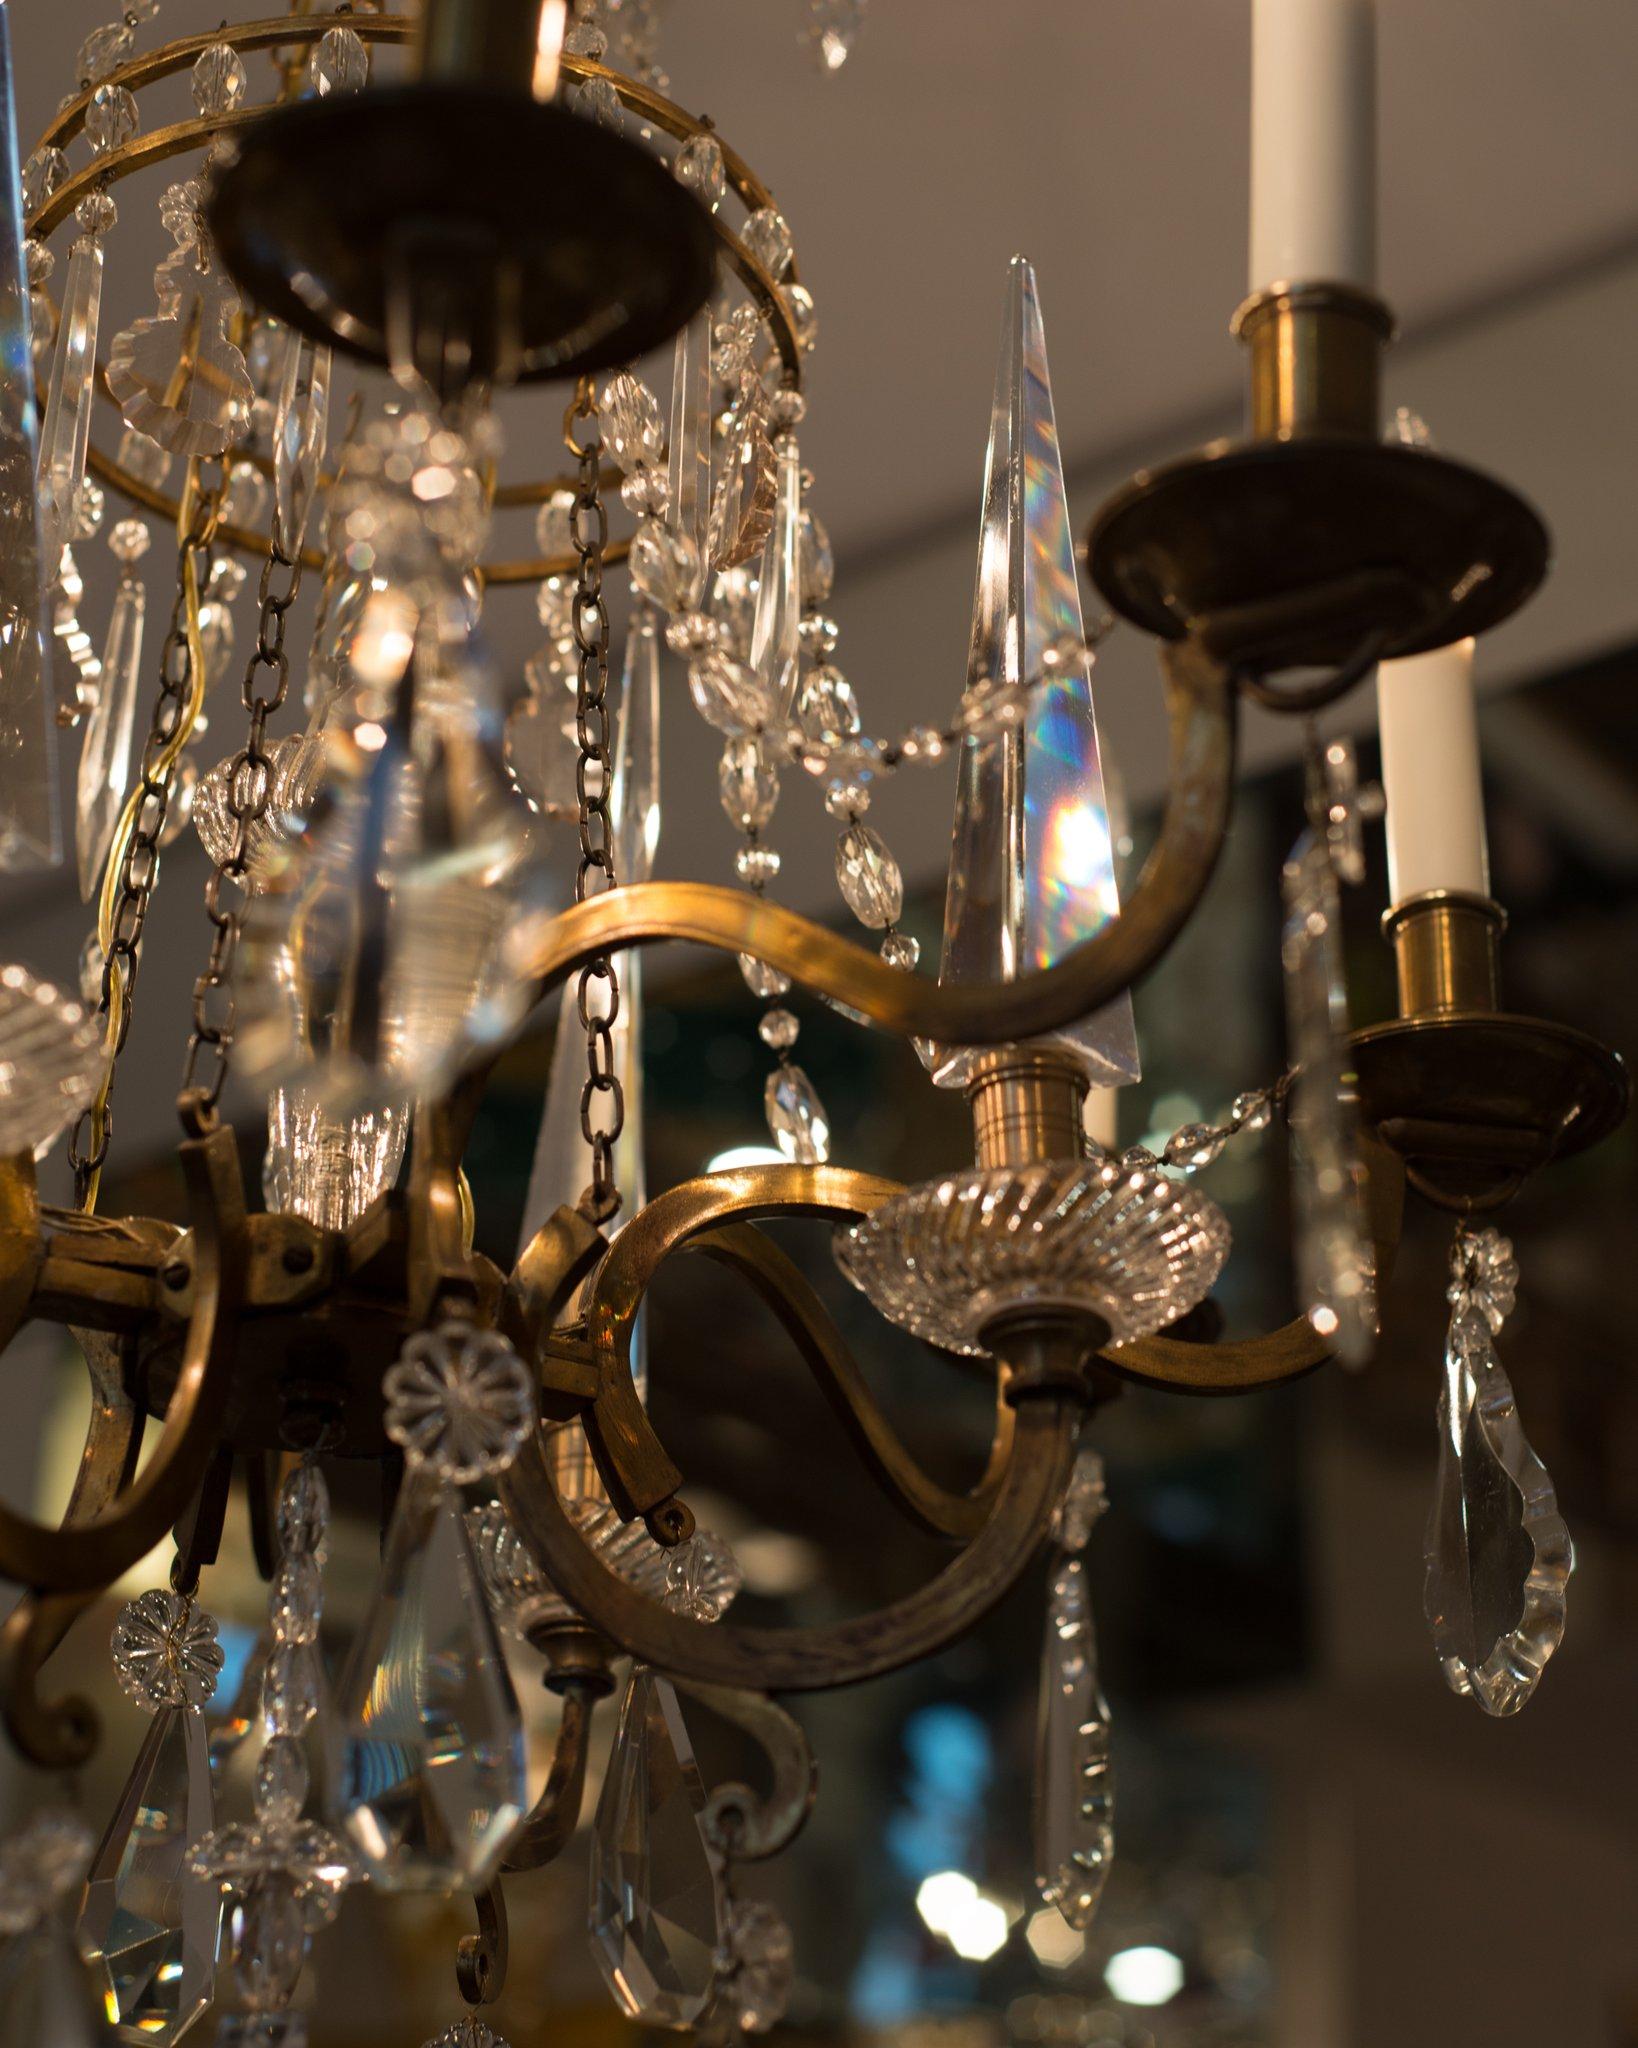 This antique Florentine crystal chandelier was discovered on a trip to Florence, Italy. Three large pyramid crystals among the candles make this specific chandelier such a rare and exceptional find. It has been newly rewired for North American